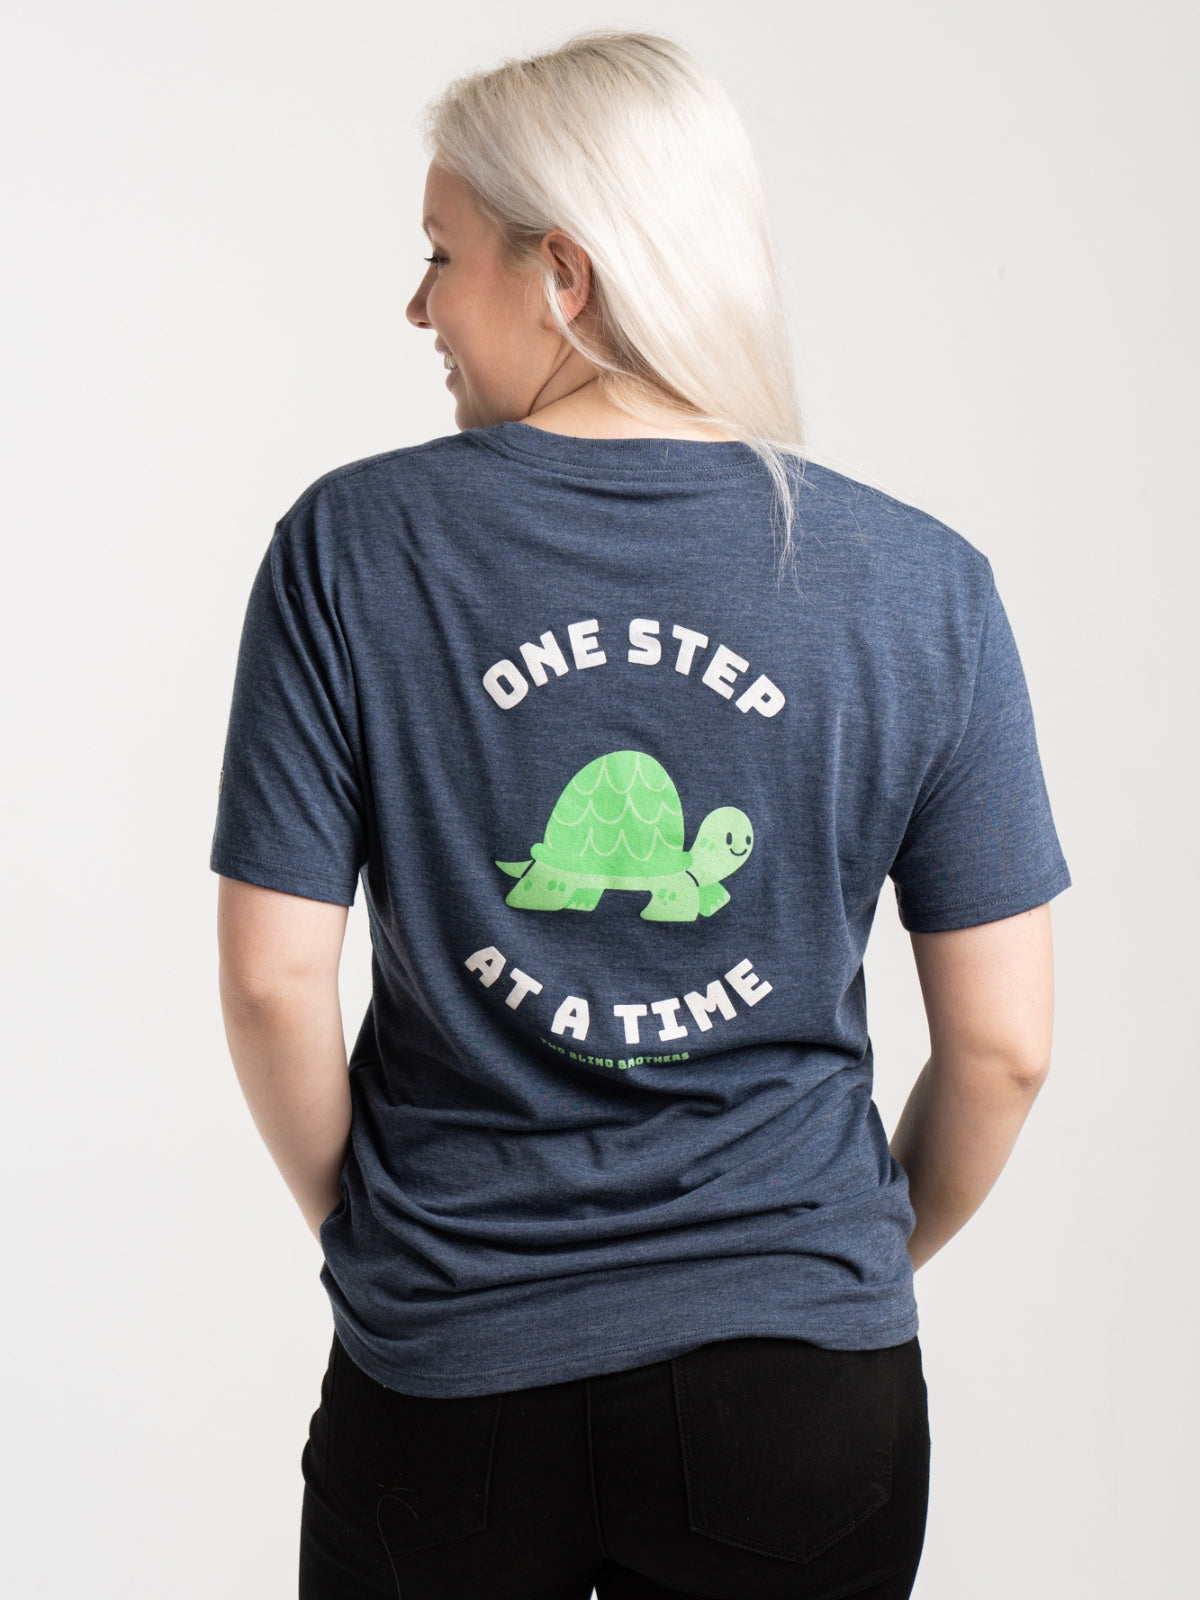 Two Blind Brothers - Womens Women's "One Step at a Time" Graphic Crewneck Navy